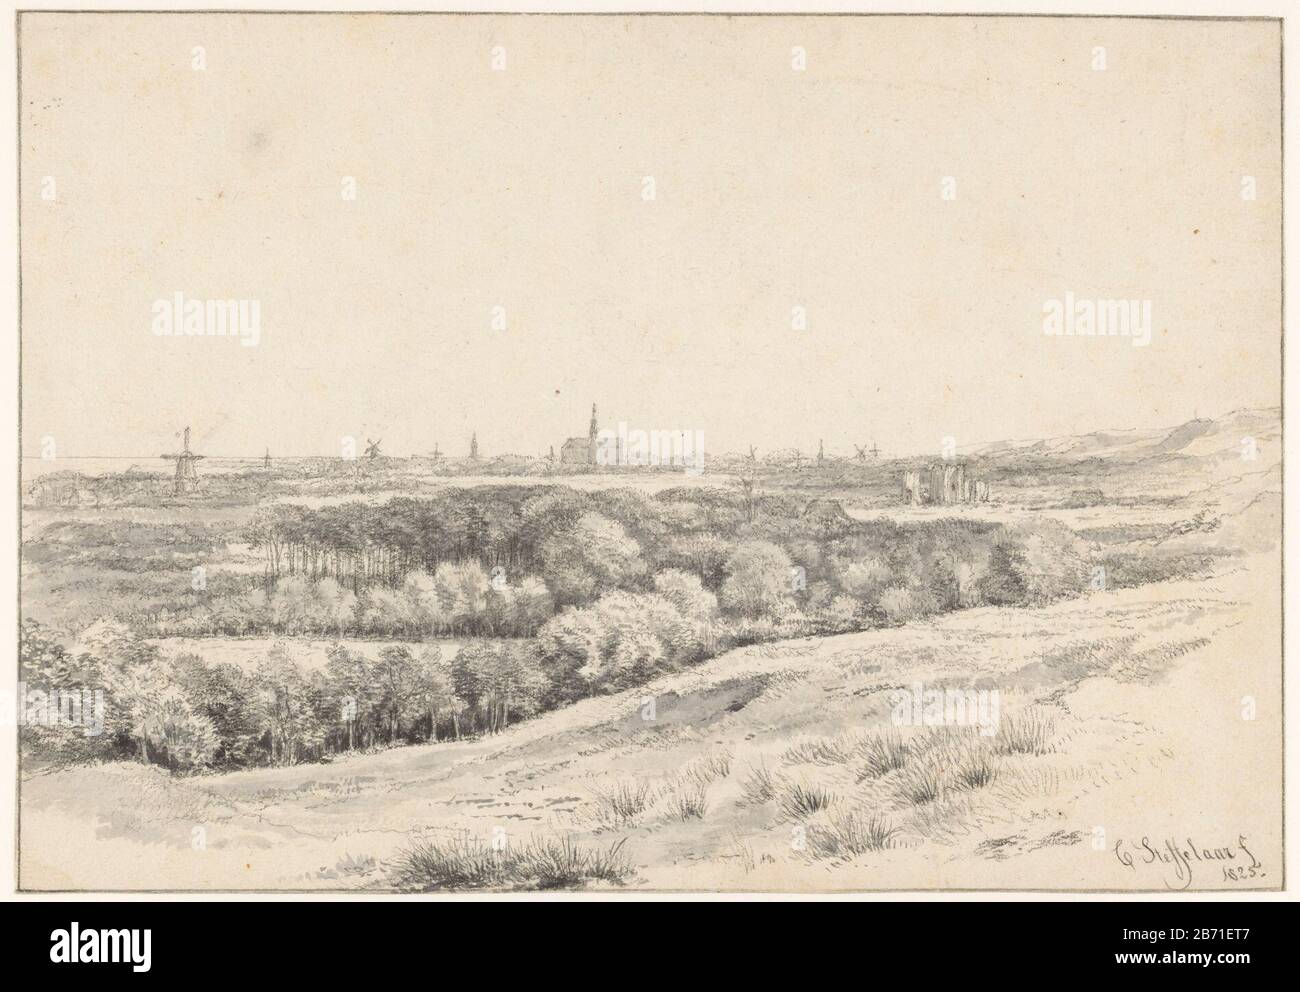 Landschap met enkele molens en een kerk in het verschiet Landscape with some mills and a church in the offing object type: Drawing Object number: RP-T-FM-141 (R) Manufacture Creator: artist: Cornelis Steffelaar Date: 1825 Physical features: brush in gray, black chalk material: paper chalk Technique: brush dimensions: h 245 mm × W 355 mm Subject: mills and factories in landscape or landscape with tower castle Stock Photo